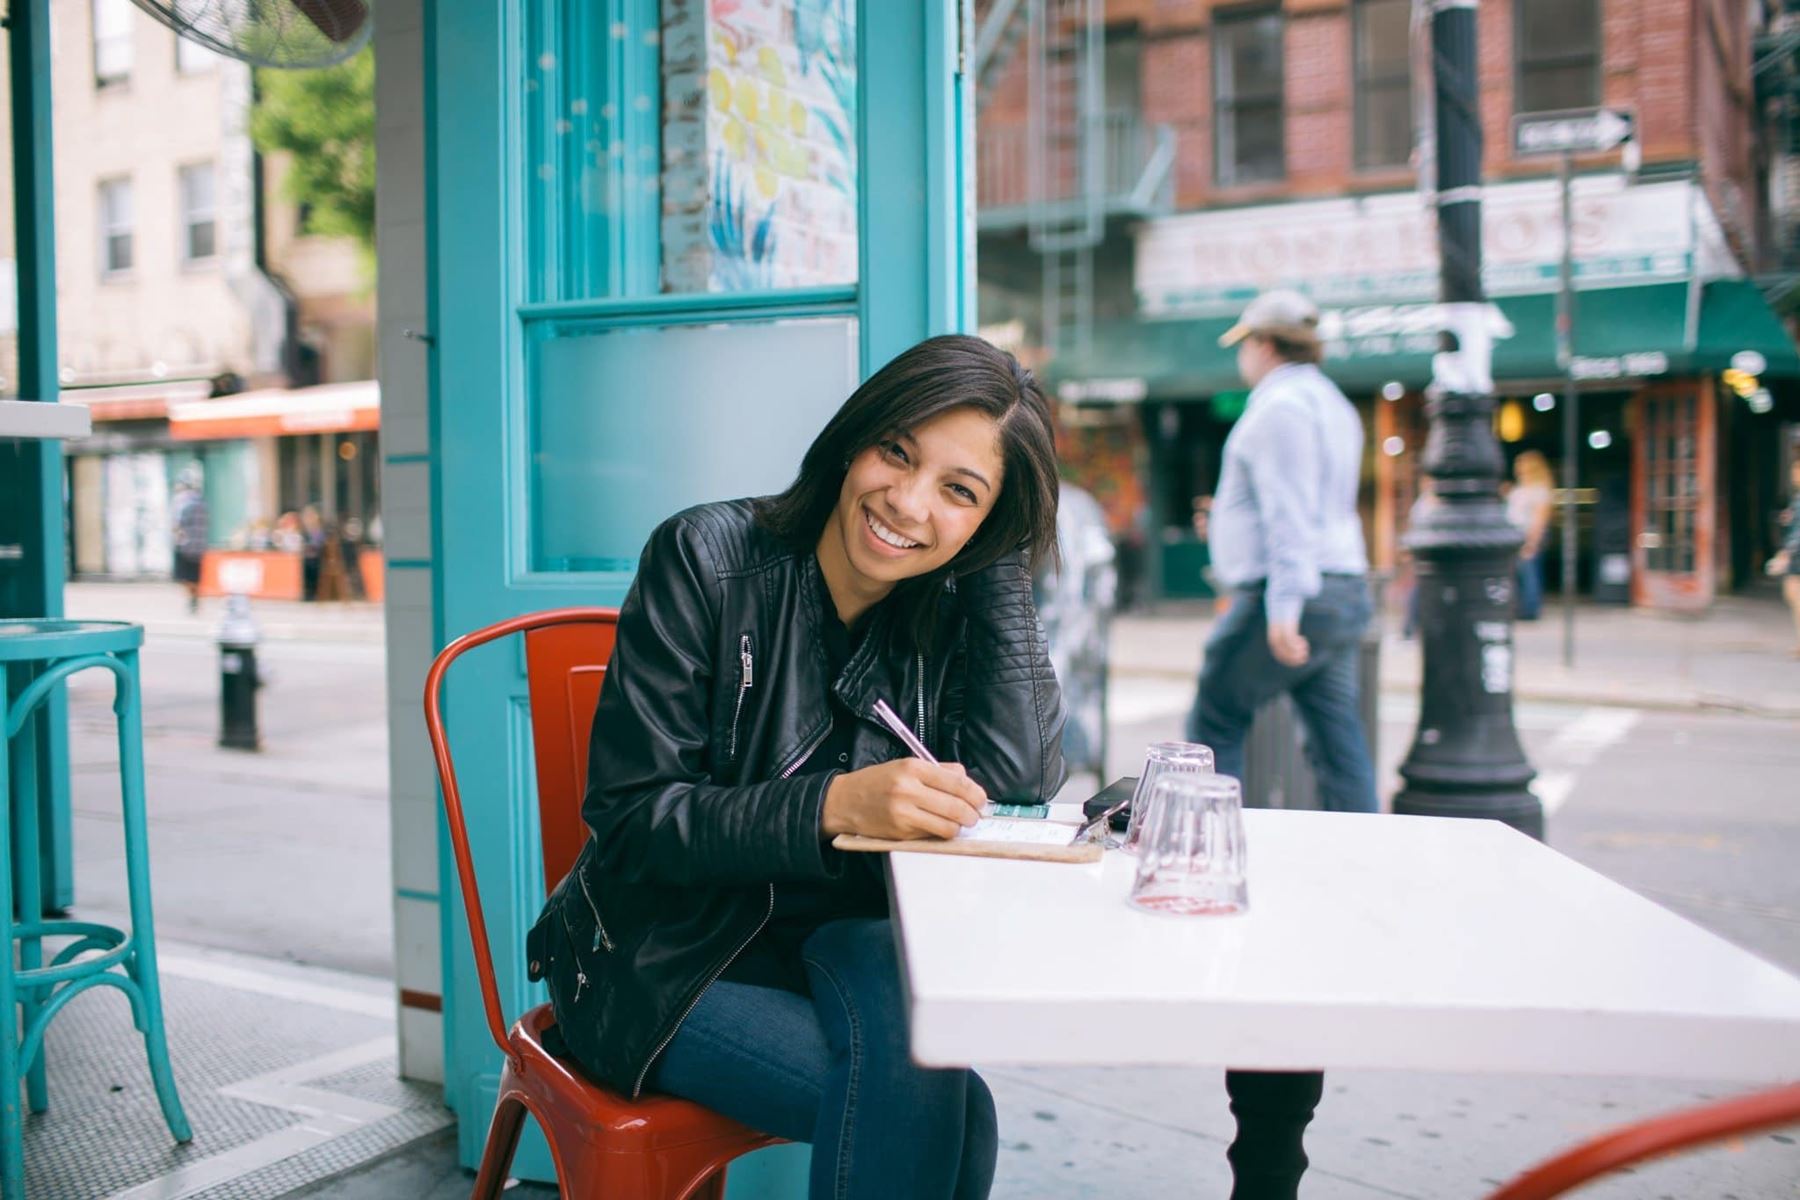 Woman sitting at an out door diner, smiling and writing on a notepad